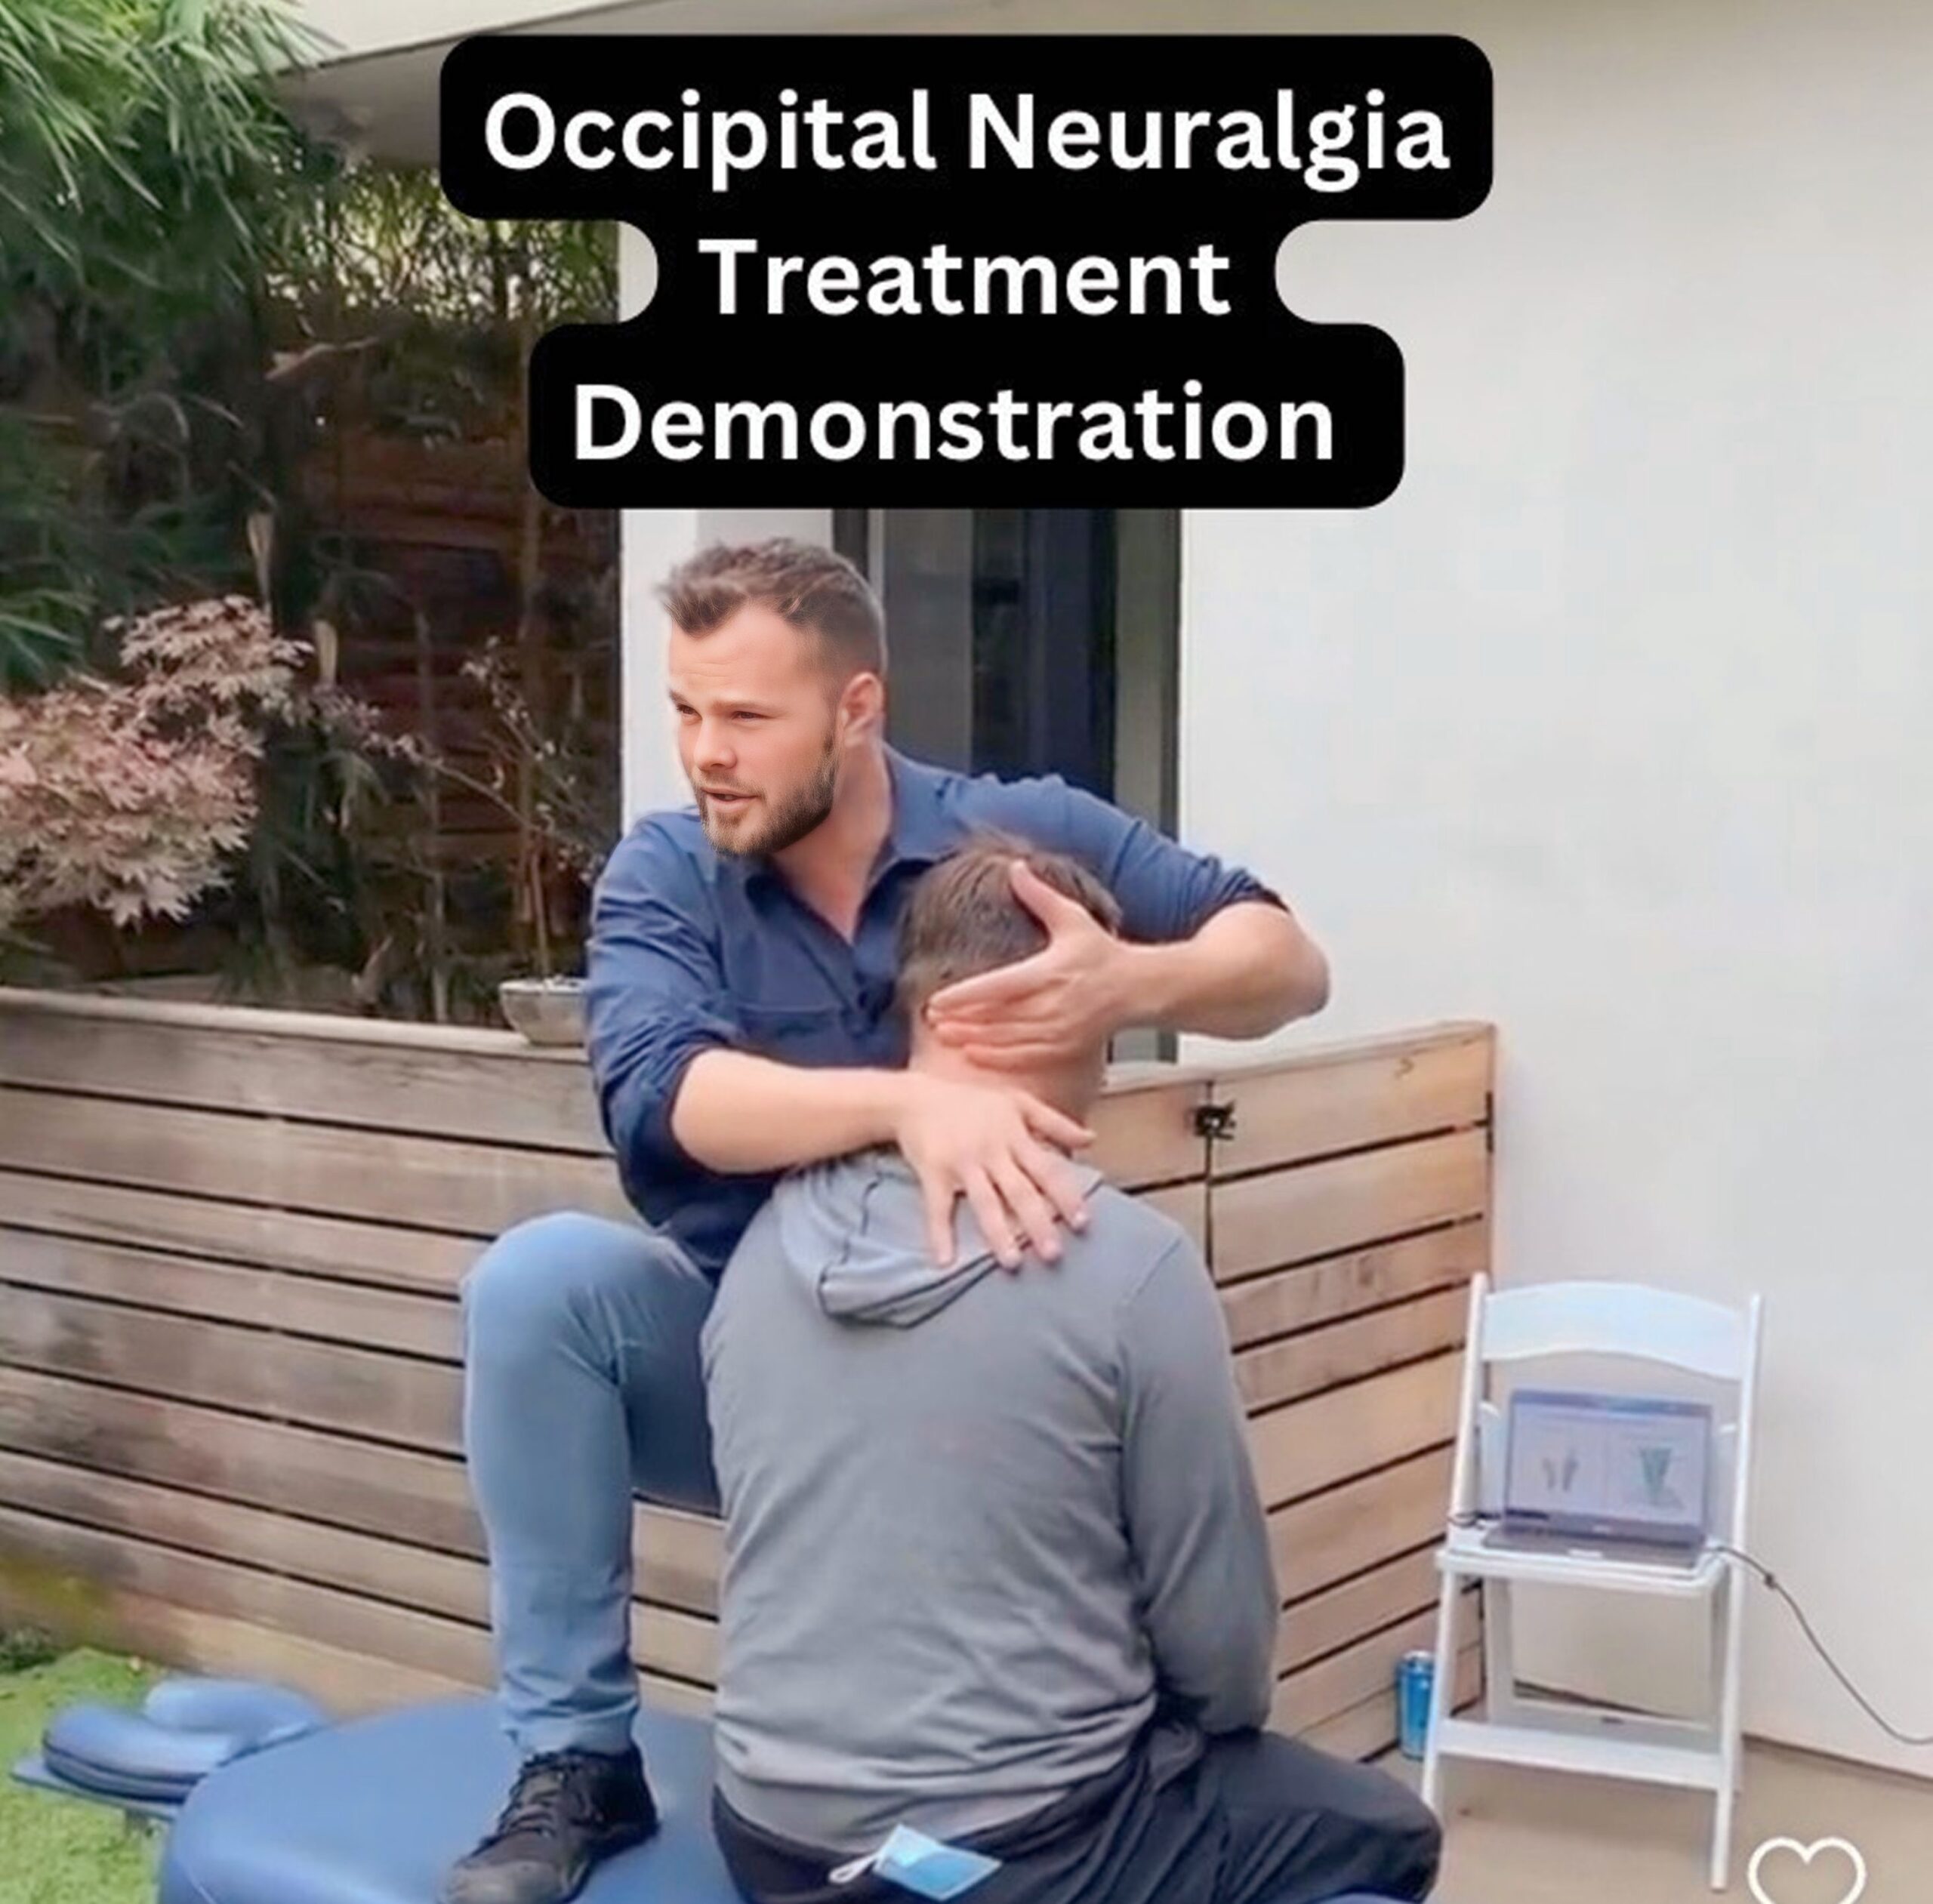 A Los Angeles nerve entrapment expert demonstrating a treatment for occipital neuralgia